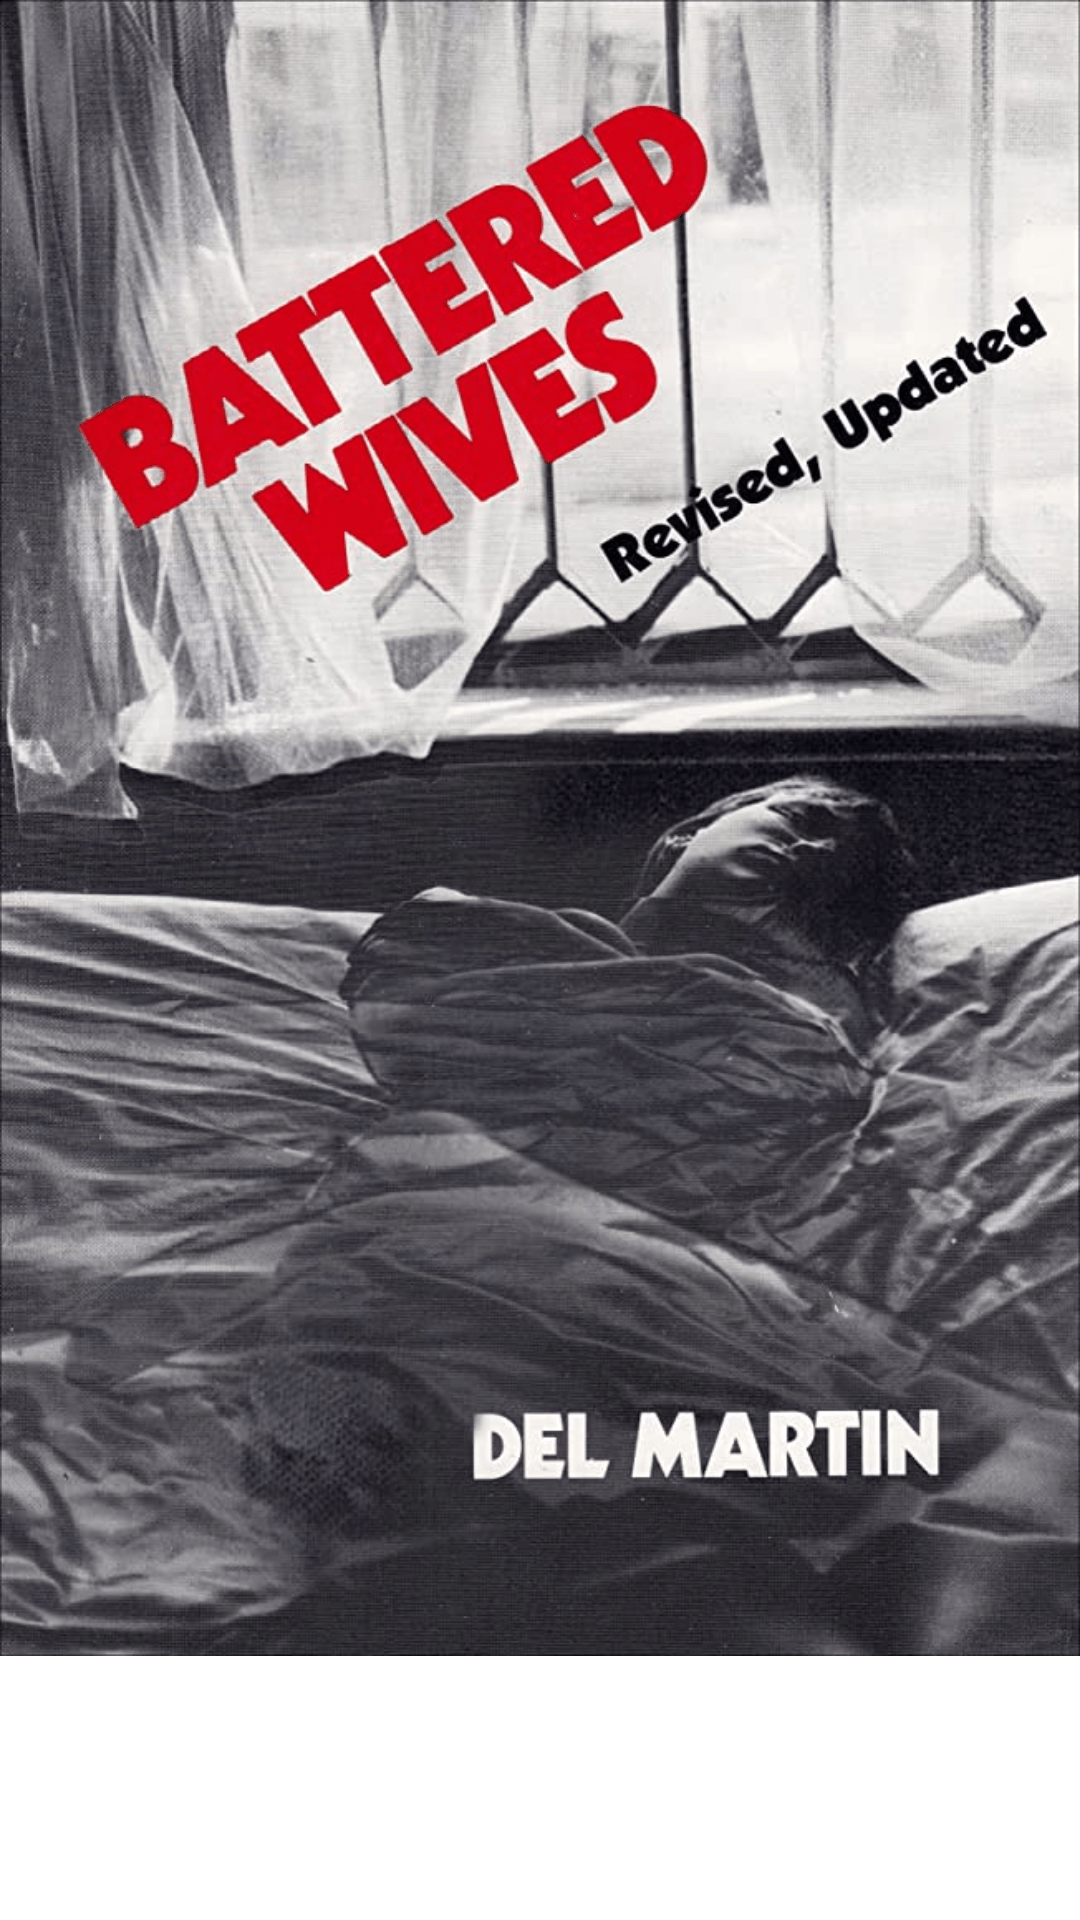 Battered Wives by Del Martin